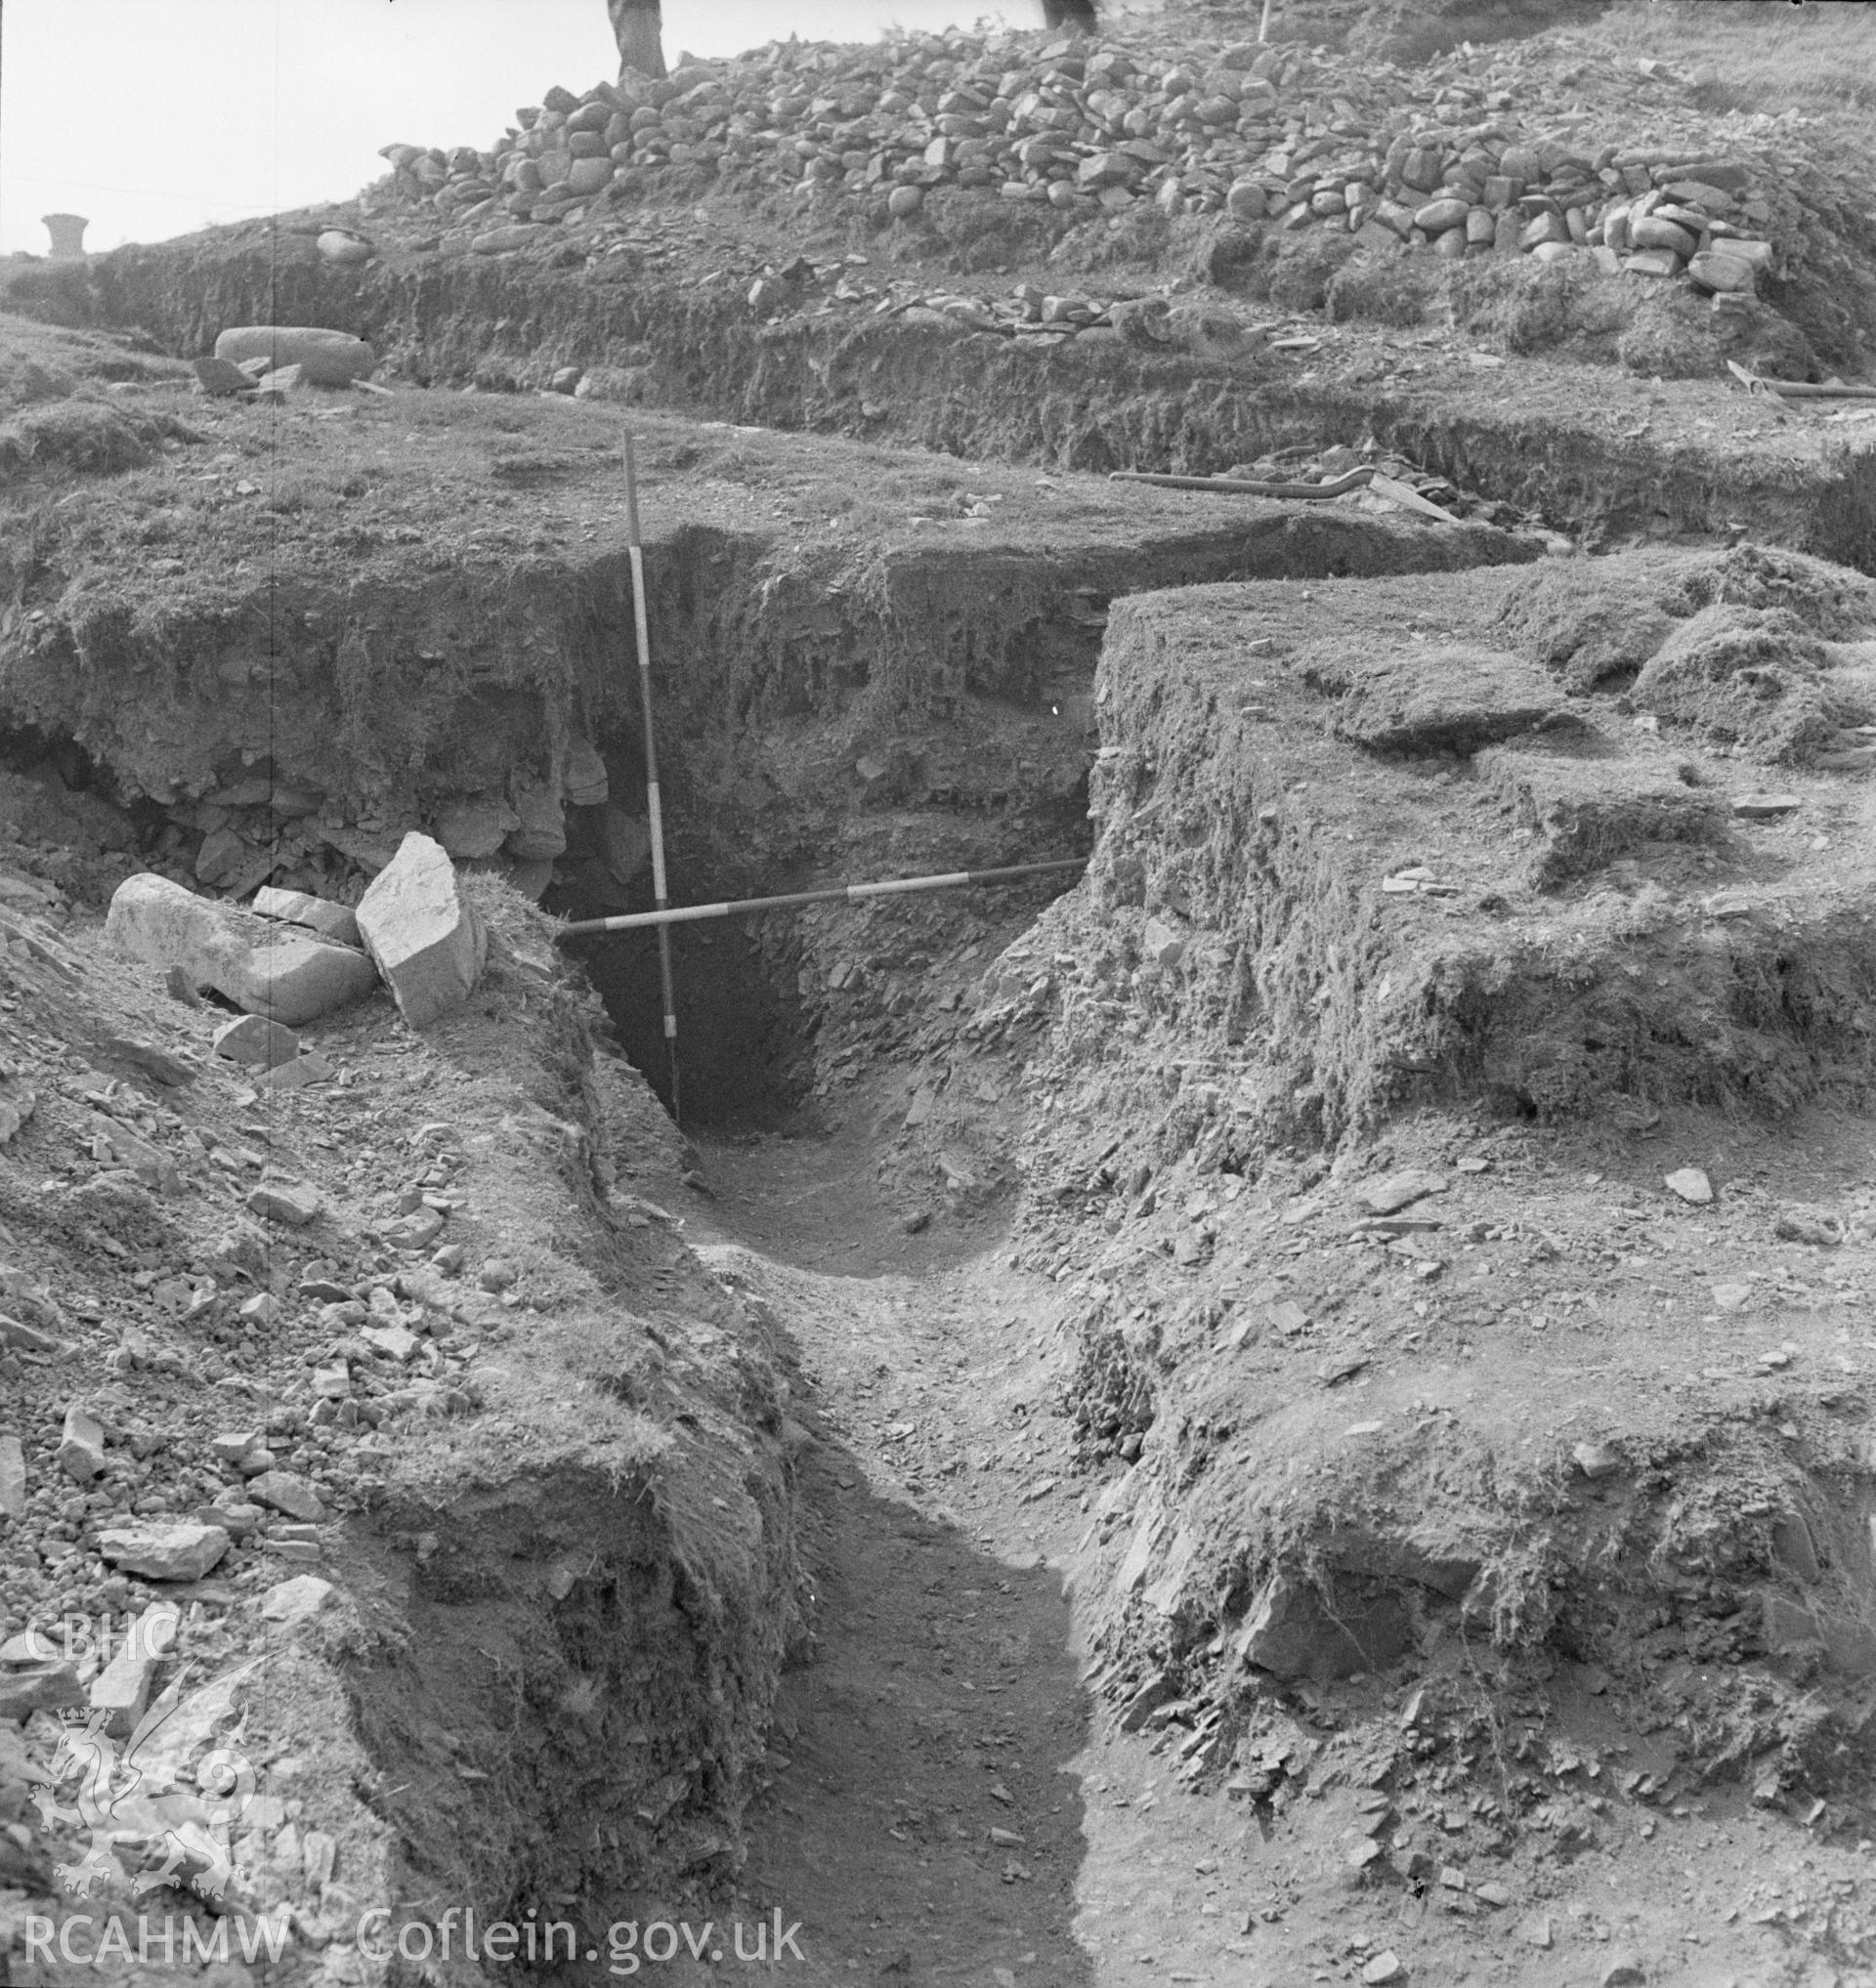 View of excavation detail